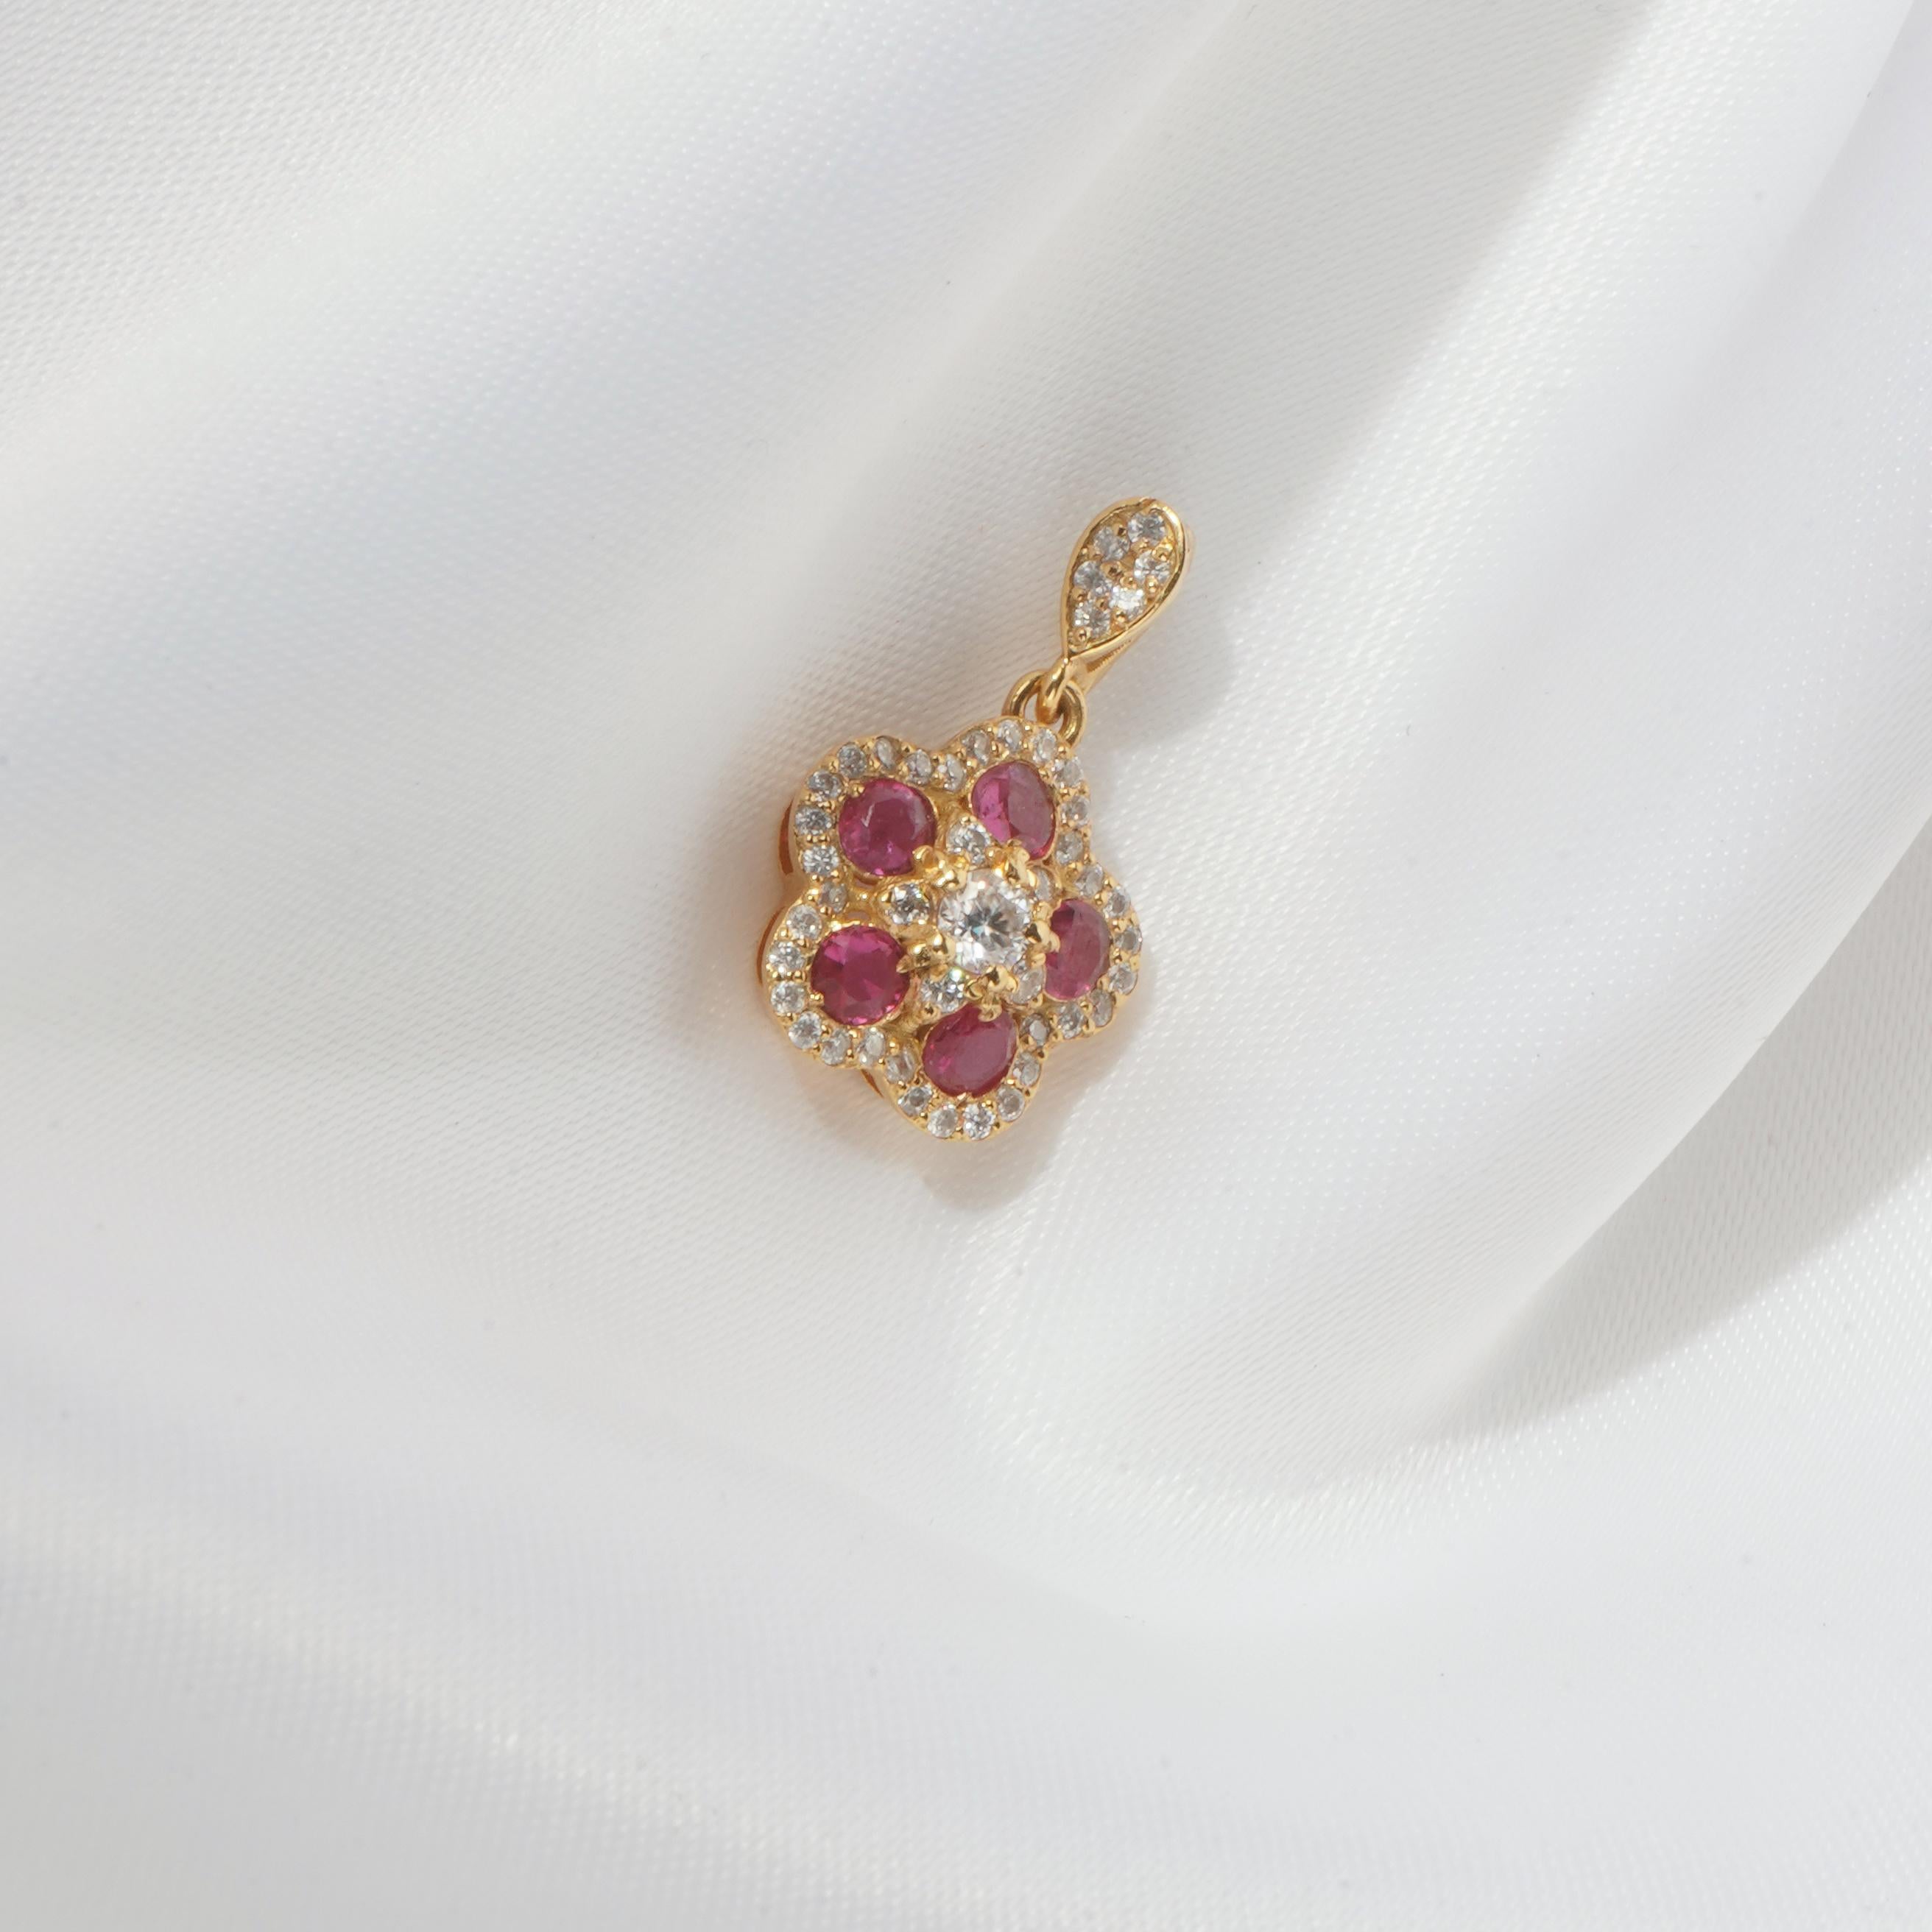 Brilliant Cut 18k Solid Gold Glory ruby pendant (**Without chain**) For Sale